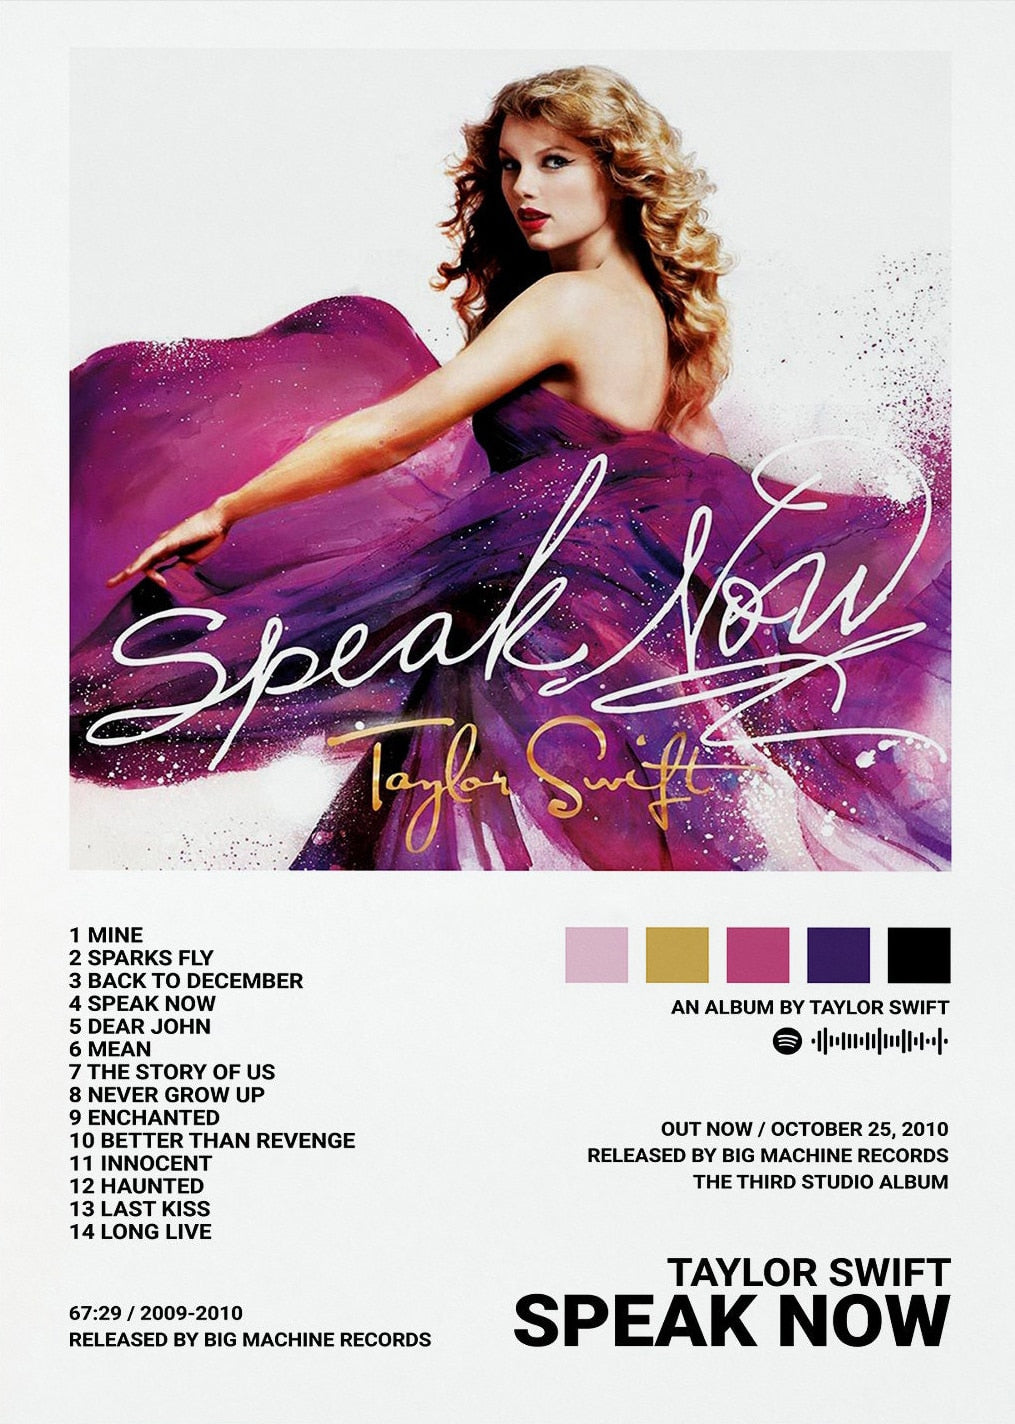 Speak Now' in the style of the Lover album cover by me 💜 : r/TaylorSwift